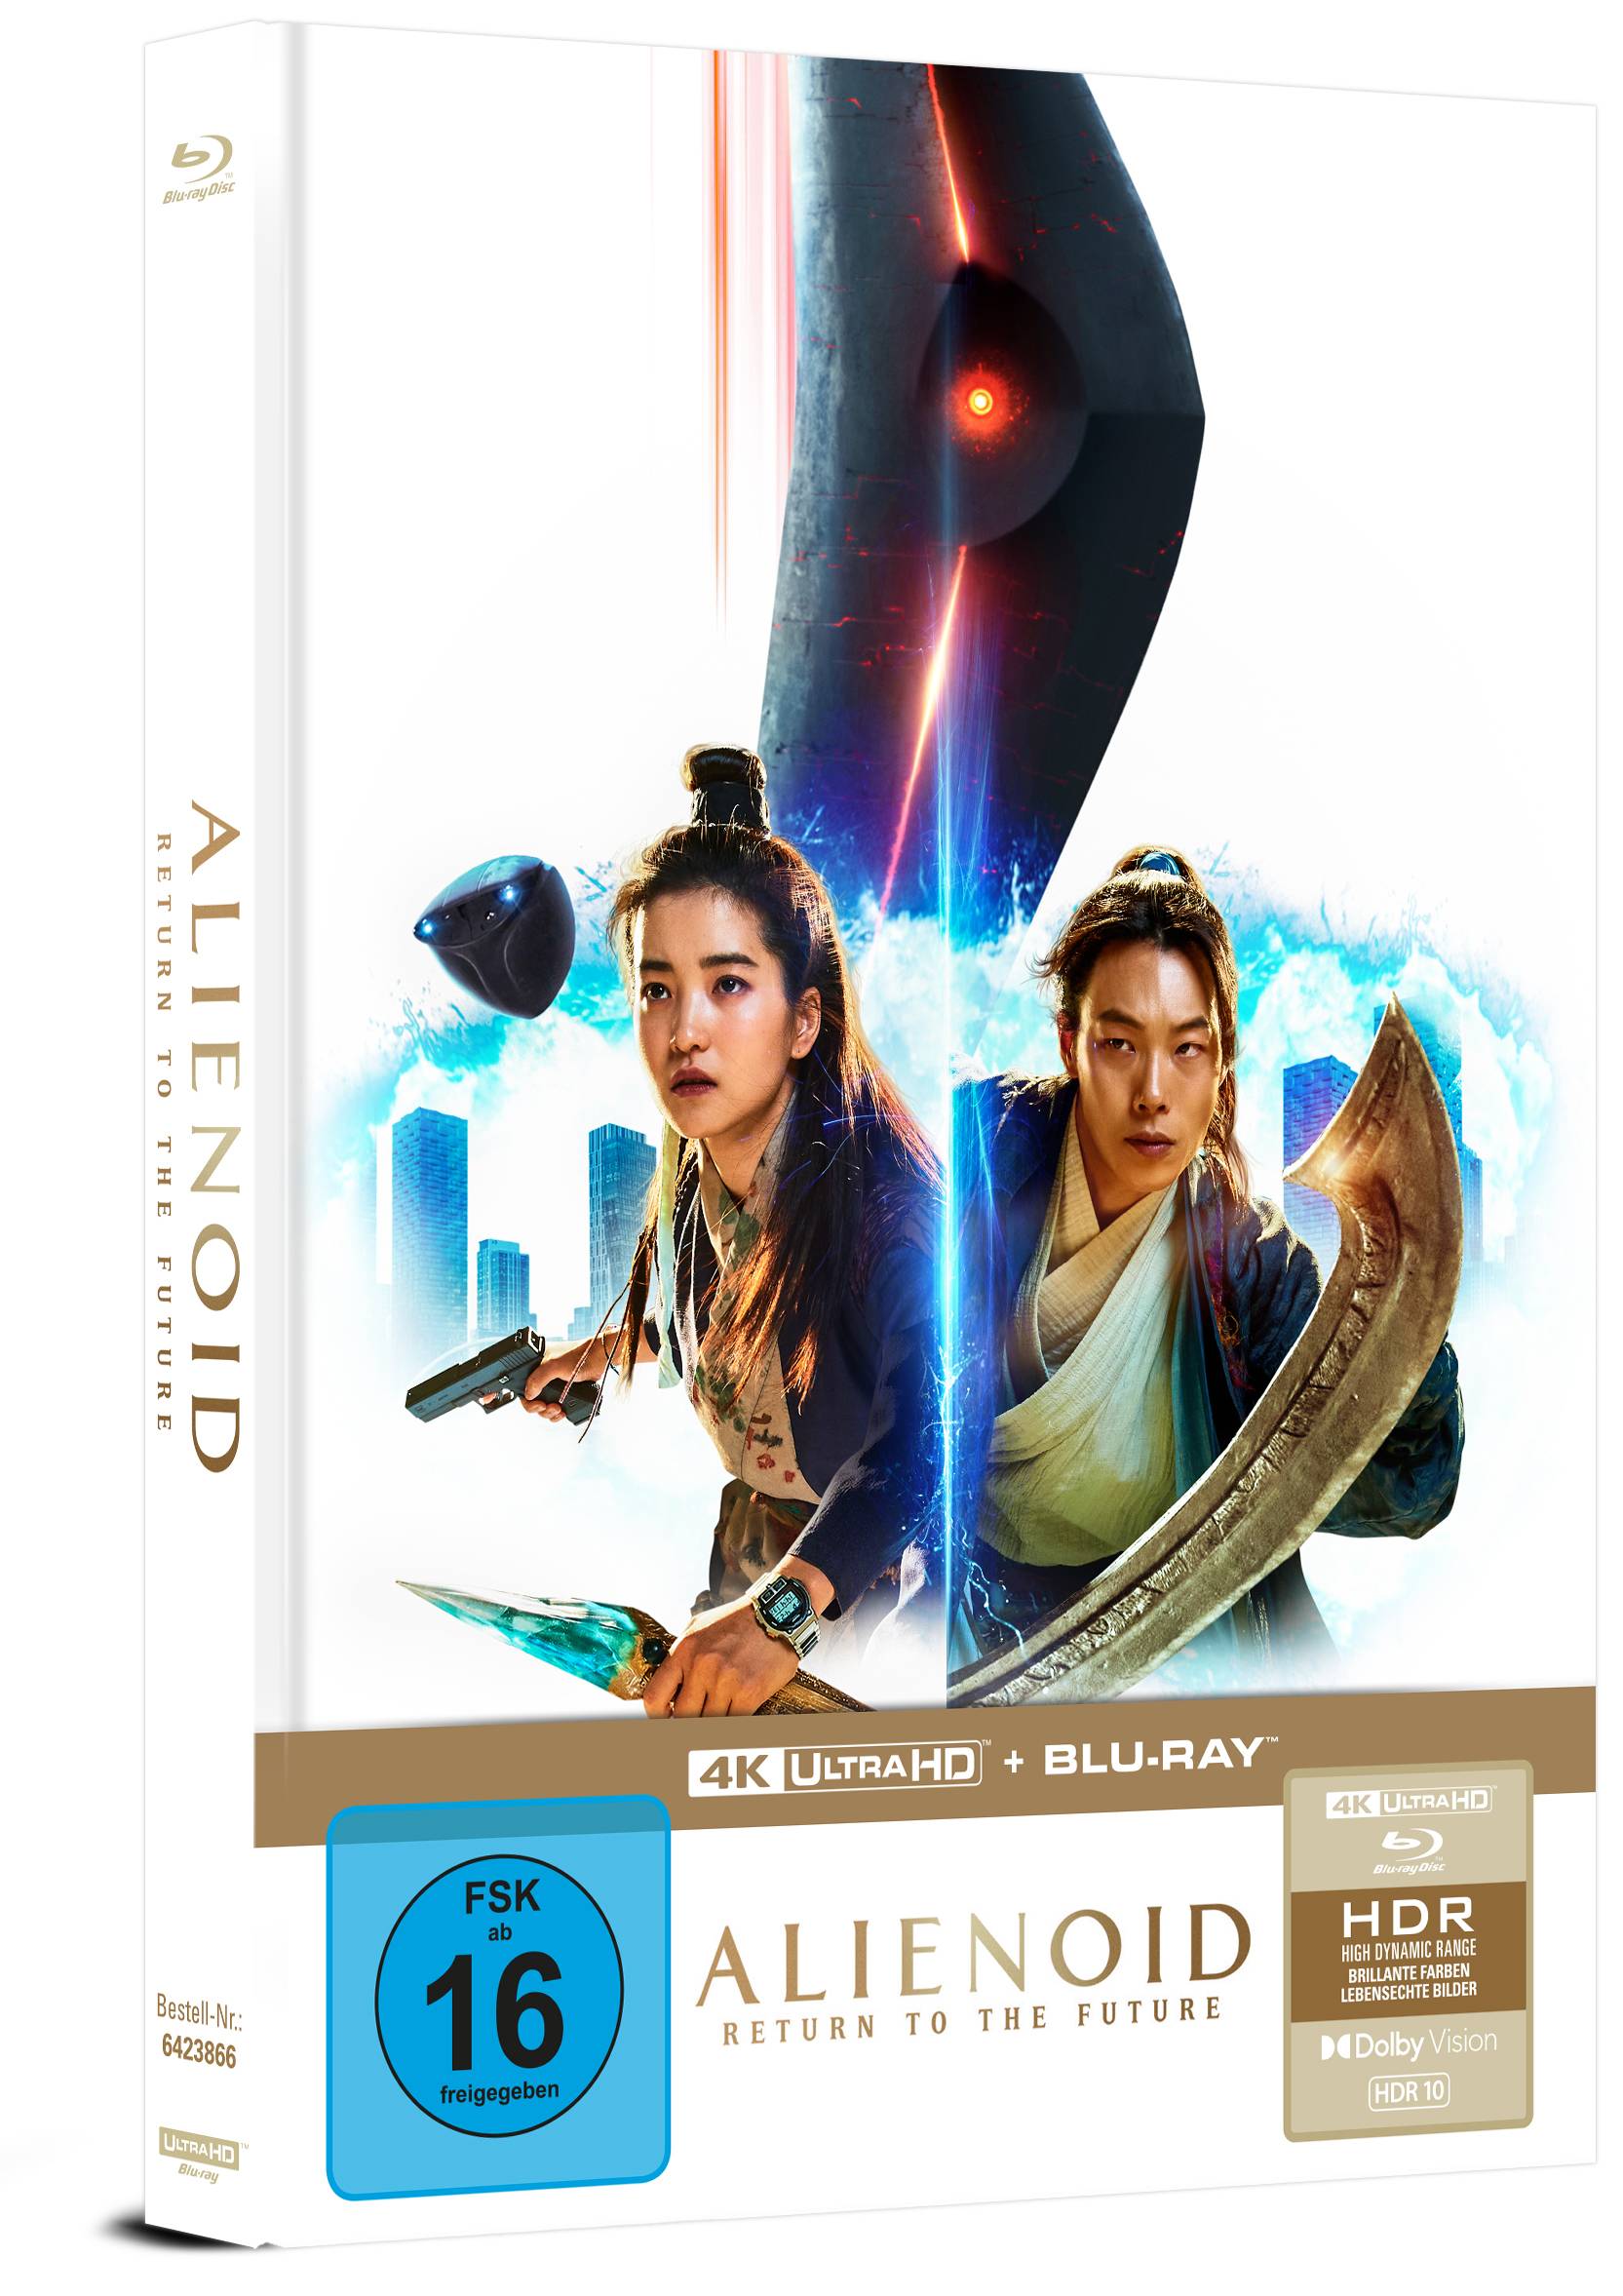 Alienoid 2: Return to the Future - 2-Disc Limited Collector's Mediabook (UHD-Blu-ray + Blu-ray)